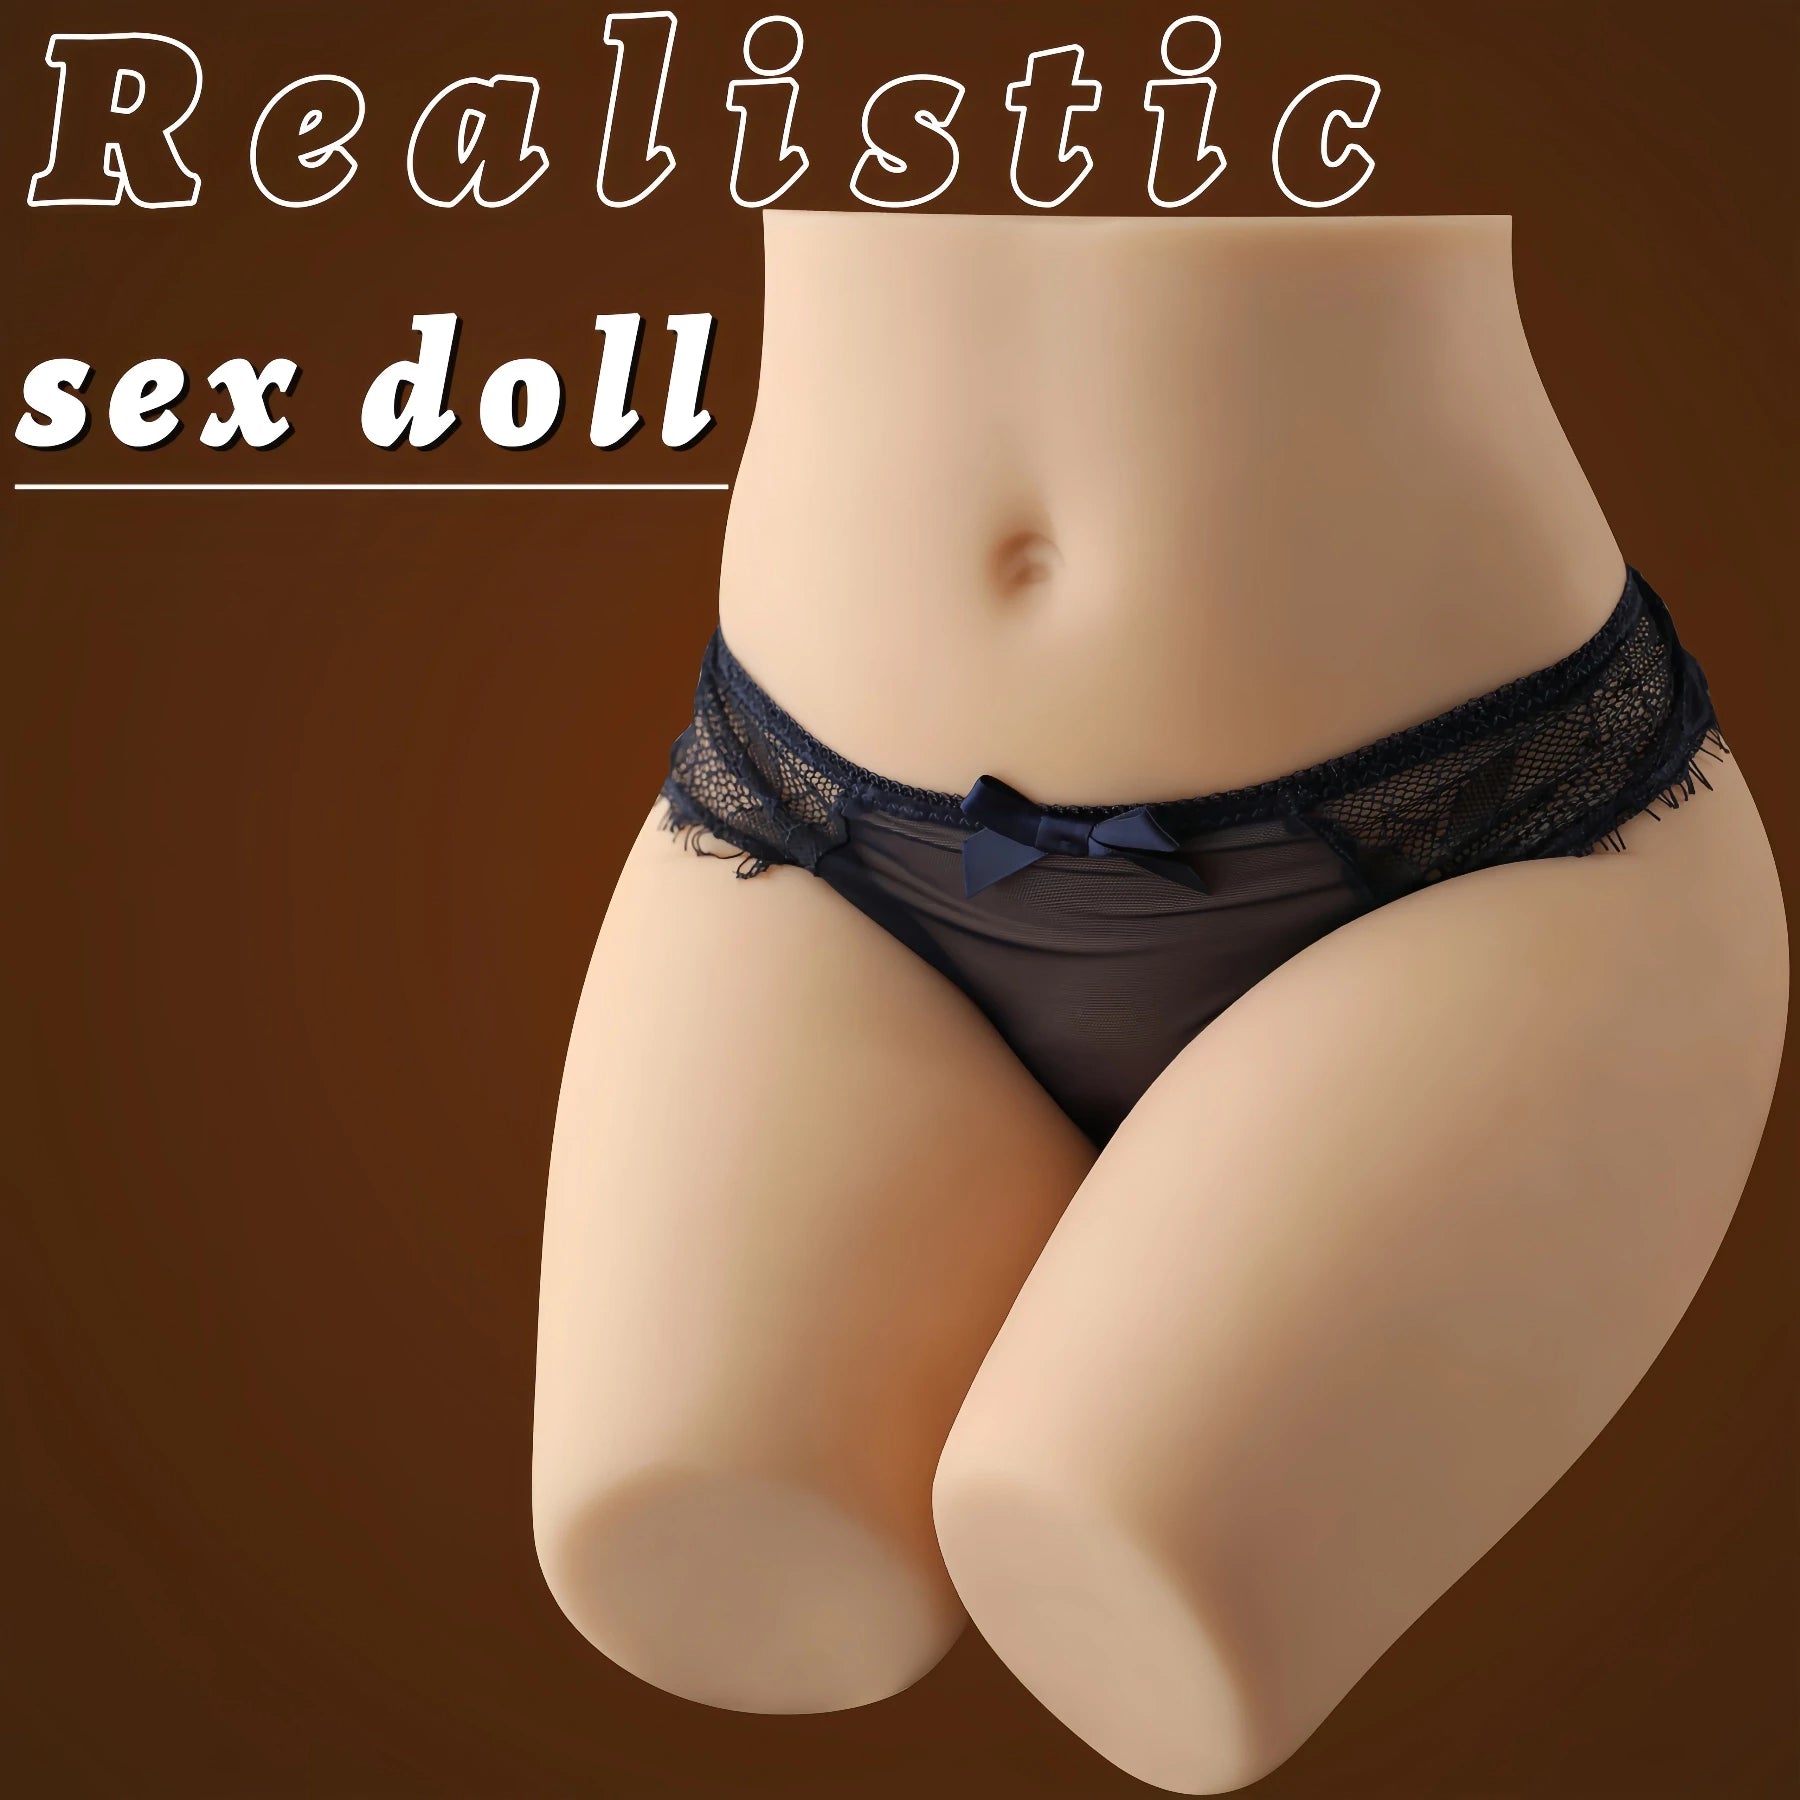 Lower body toro sex doll with sexy legs-Slender and elastic long legs